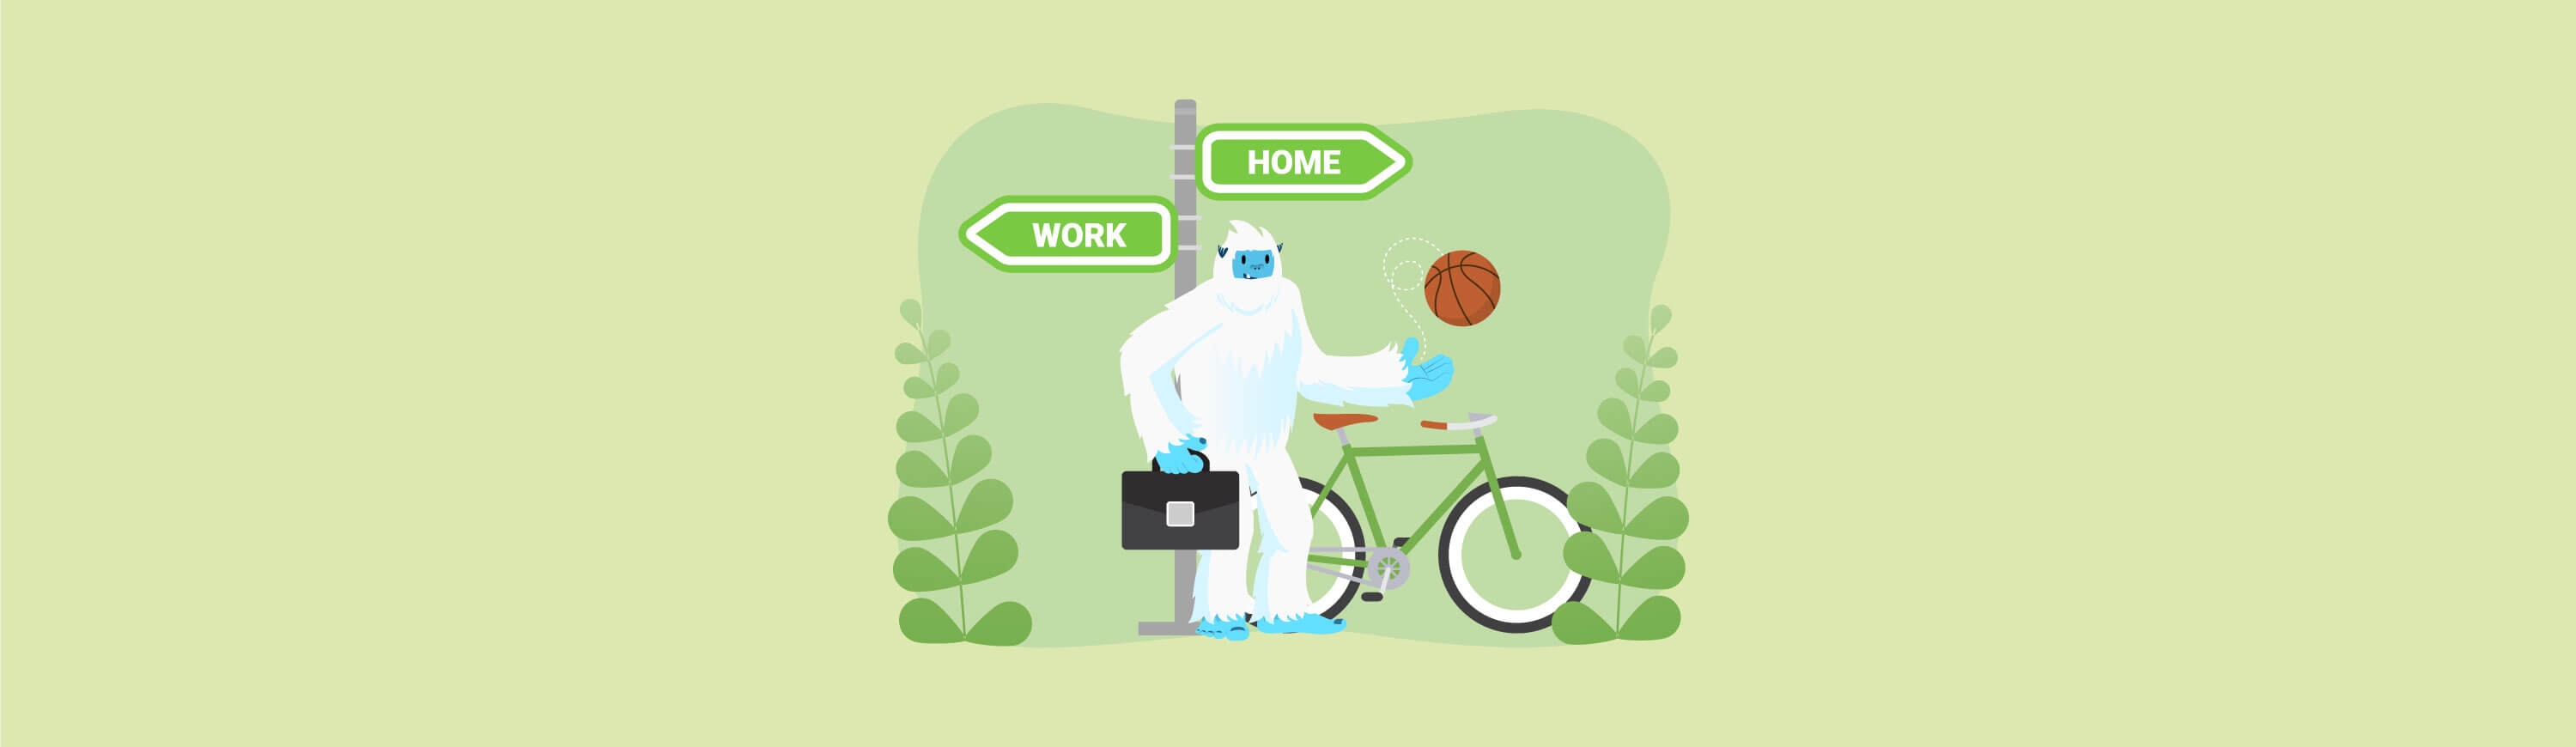 Illustration of Carl the yeti standing next to a sign with arrows pointing to either work or home.